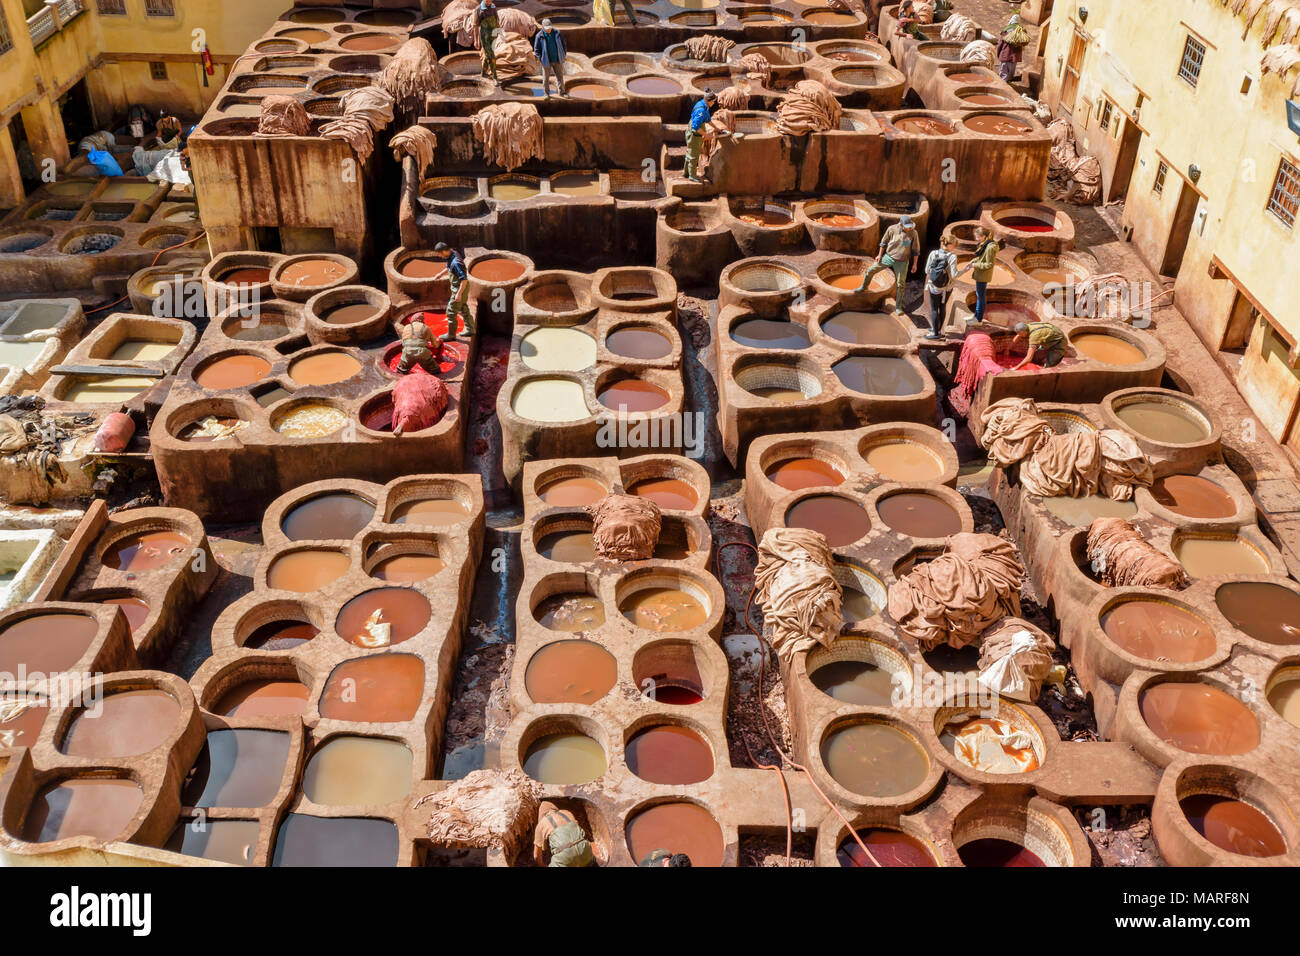 MOROCCO FES MEDINA SOUK CHOUWARA TANNERY TANNERIES VIEW OF THE WORKERS AND CIRCULAR VATS OR TANKS WITH VARIOUS MULTICOLOURED DYES CONTAINING THE HIDES Stock Photo